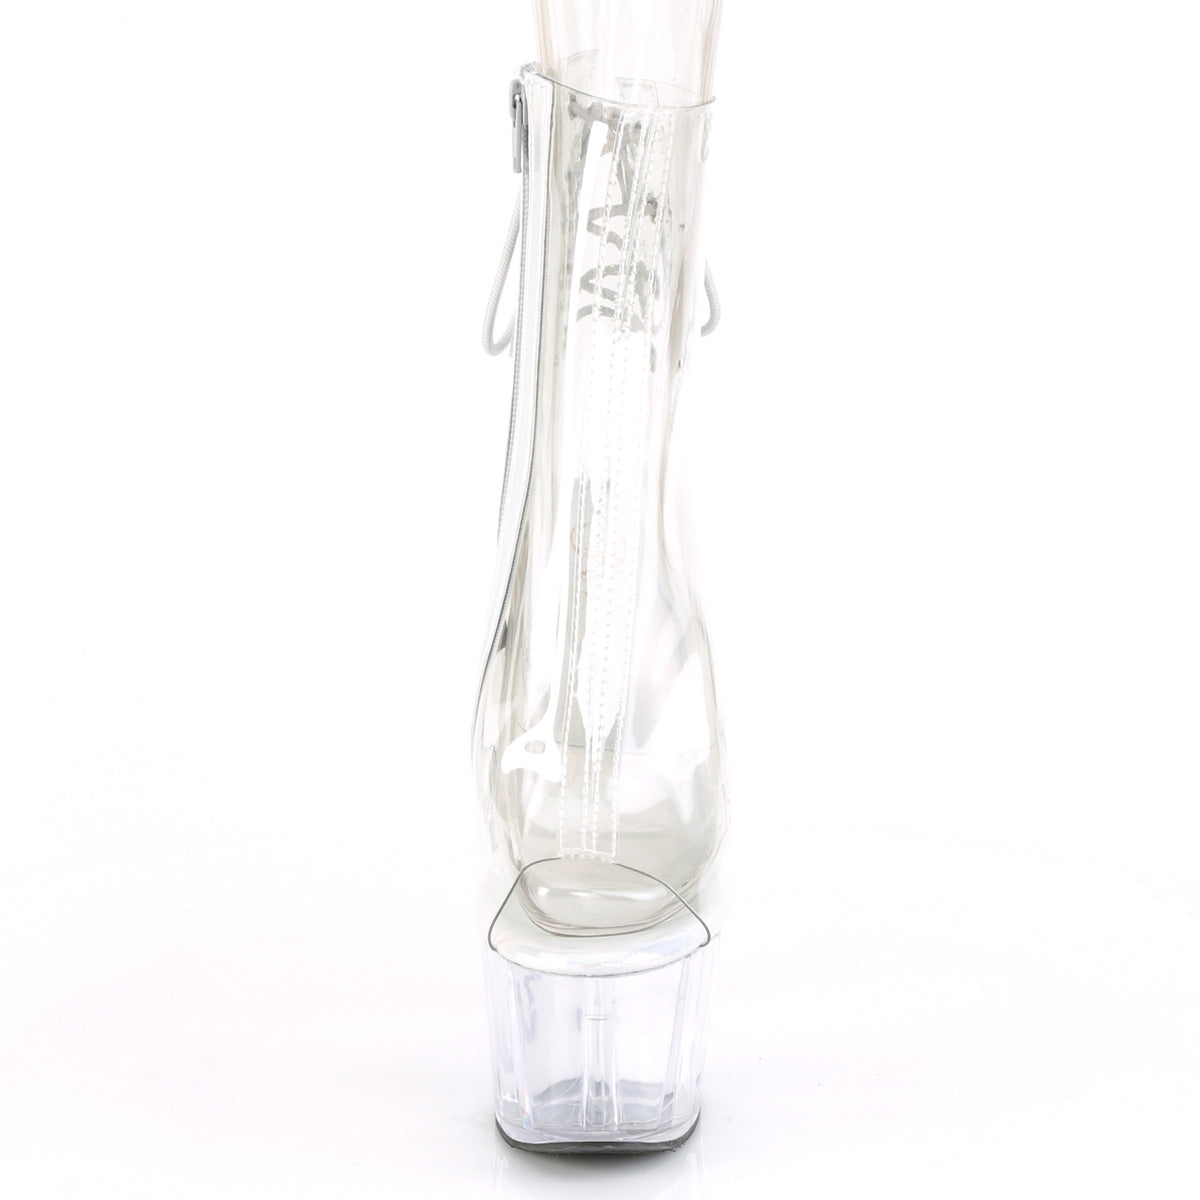 ADORE-1018C - Clear Boots